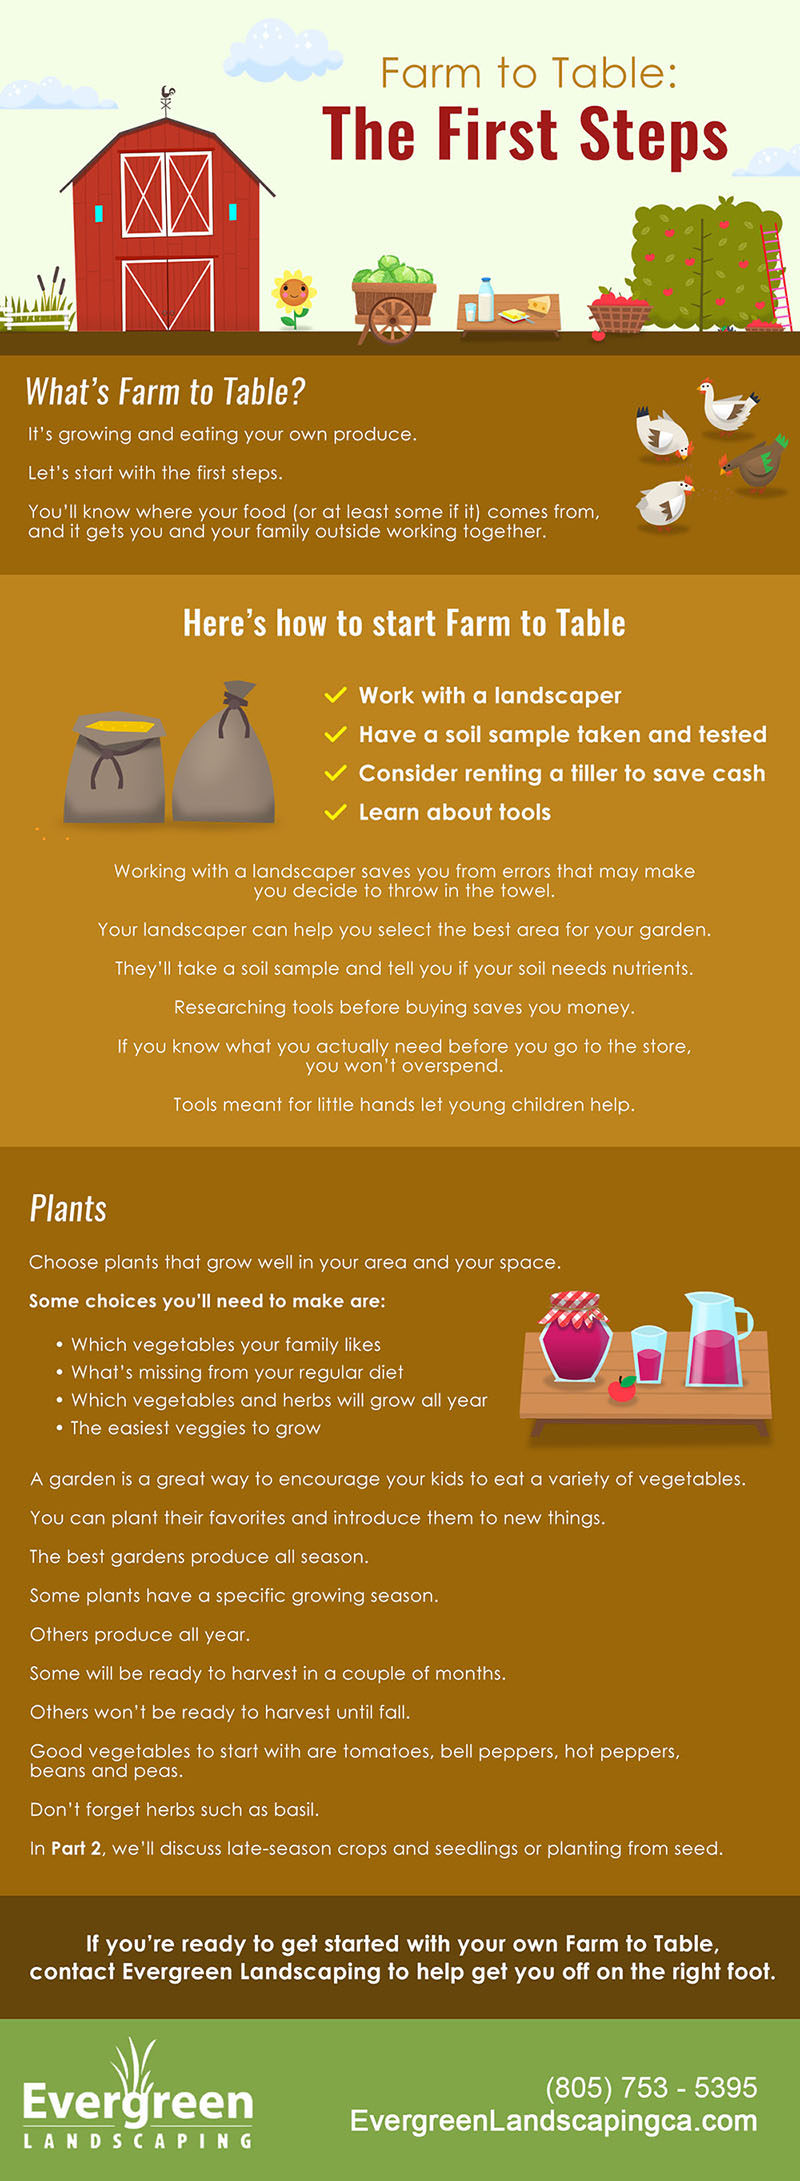 Farm to Table The First Steps [Infographic] Evergreen Landscaping